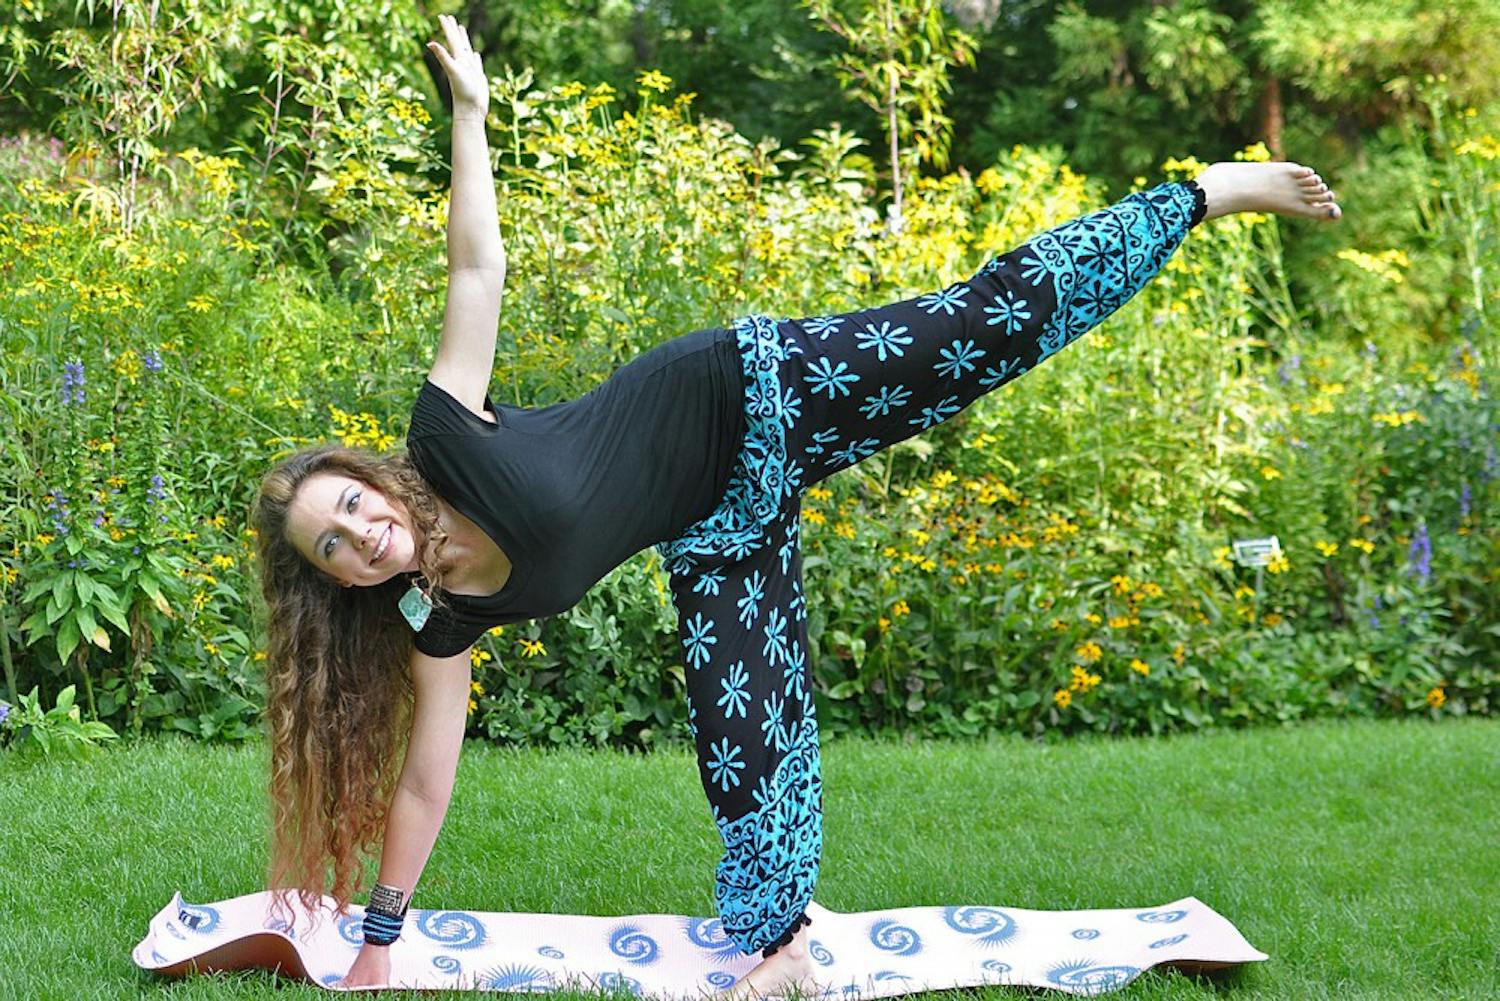 Kamaira Philips is the founder, president and treasurer of Mind, Body, Spirit Connection, a social and wellness organization at UNC. Philips is leading a community yoga class in the Coker Arboretum at 2 p.m. on Friday.